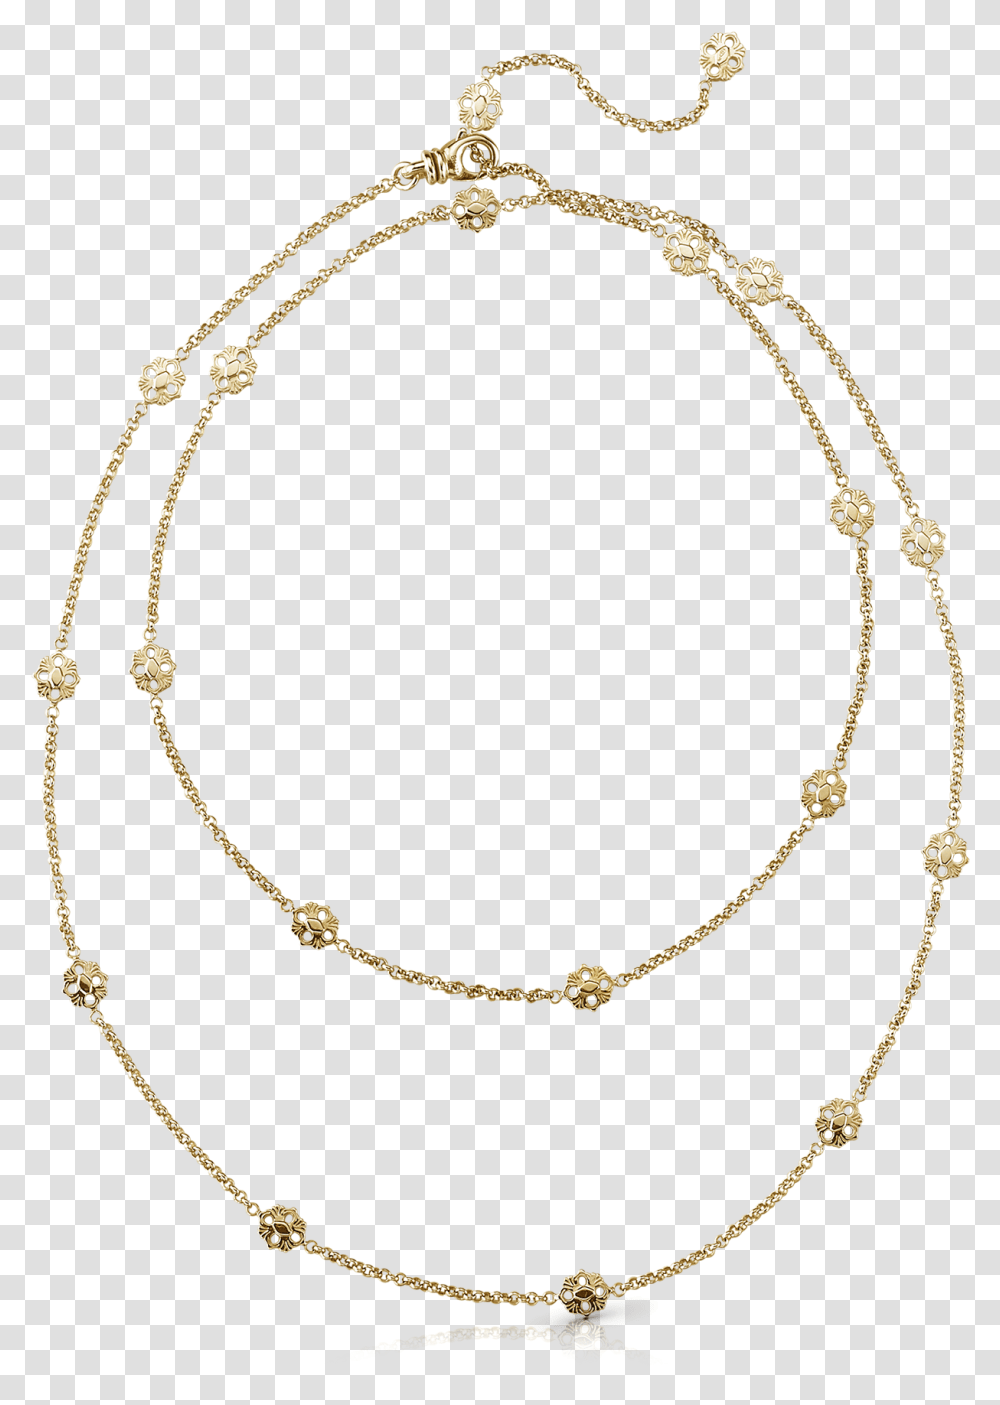 Buccellati Necklaces Opera Necklace Jewelry Necklace, Accessories, Accessory, Hip, Chain Transparent Png